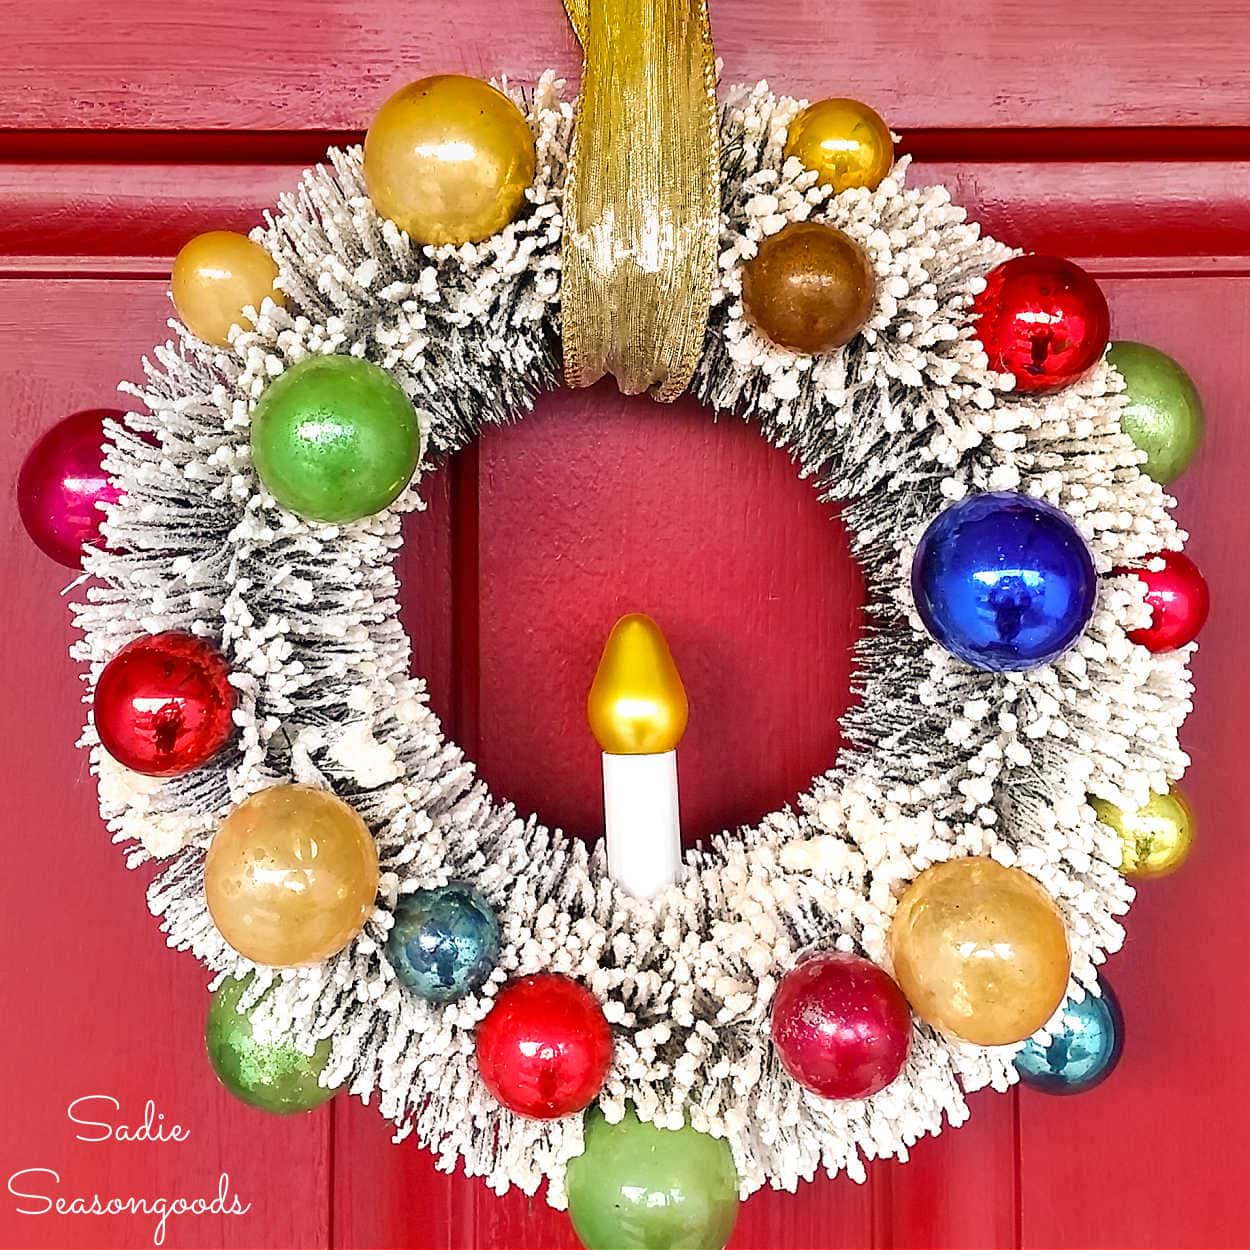 vintage bottlebrush wreath that has been decorated with vintage ornaments